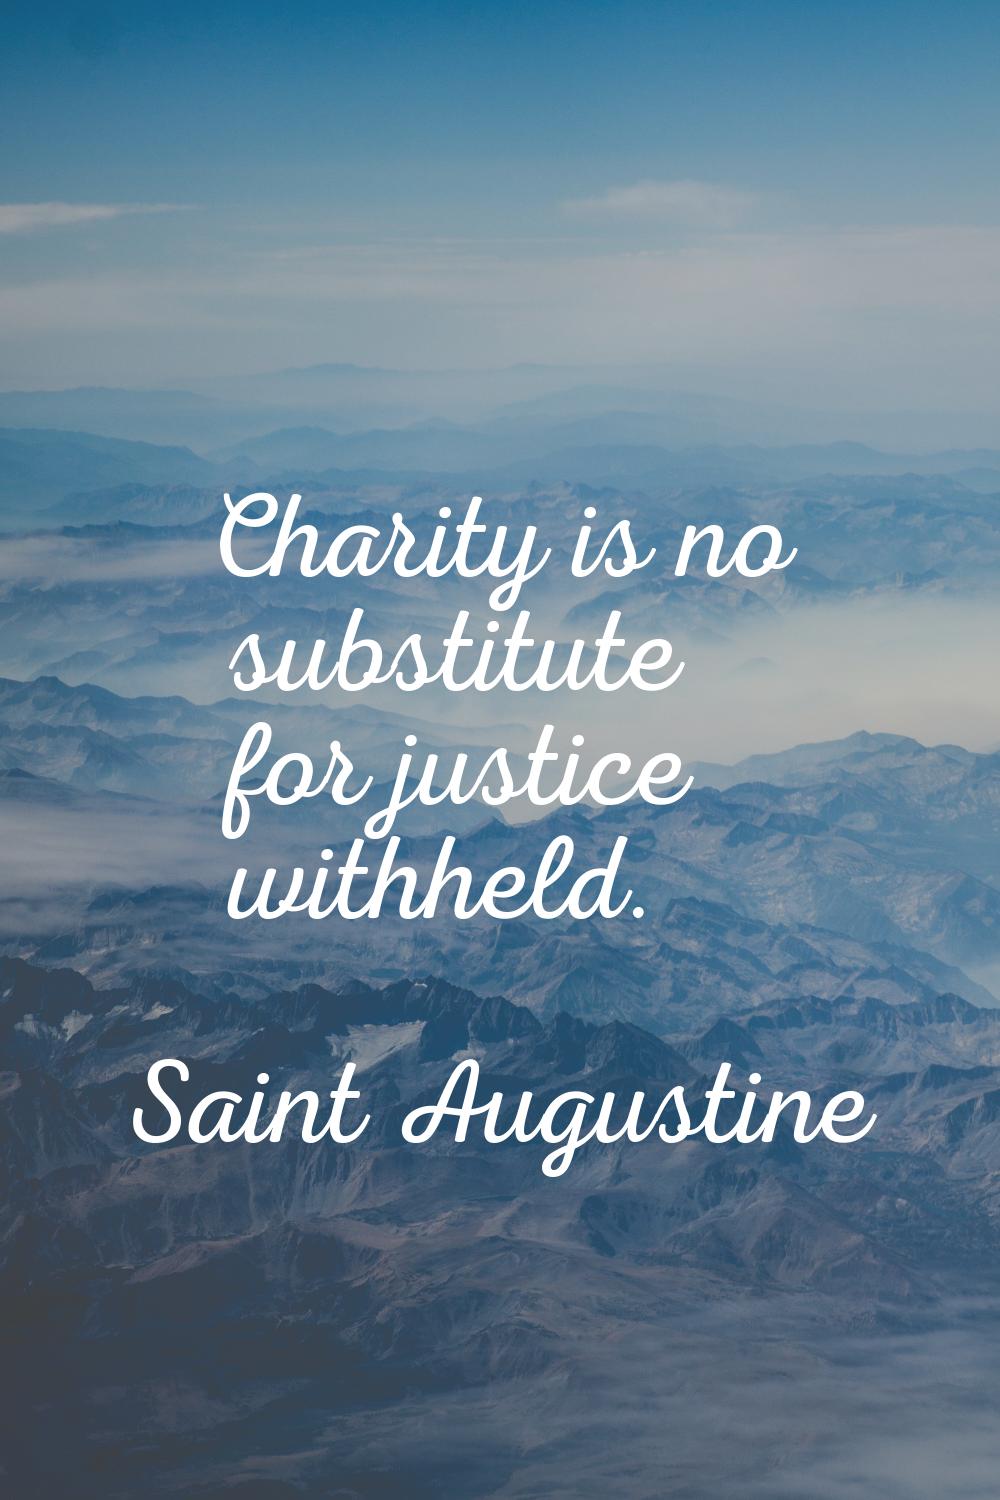 Charity is no substitute for justice withheld.